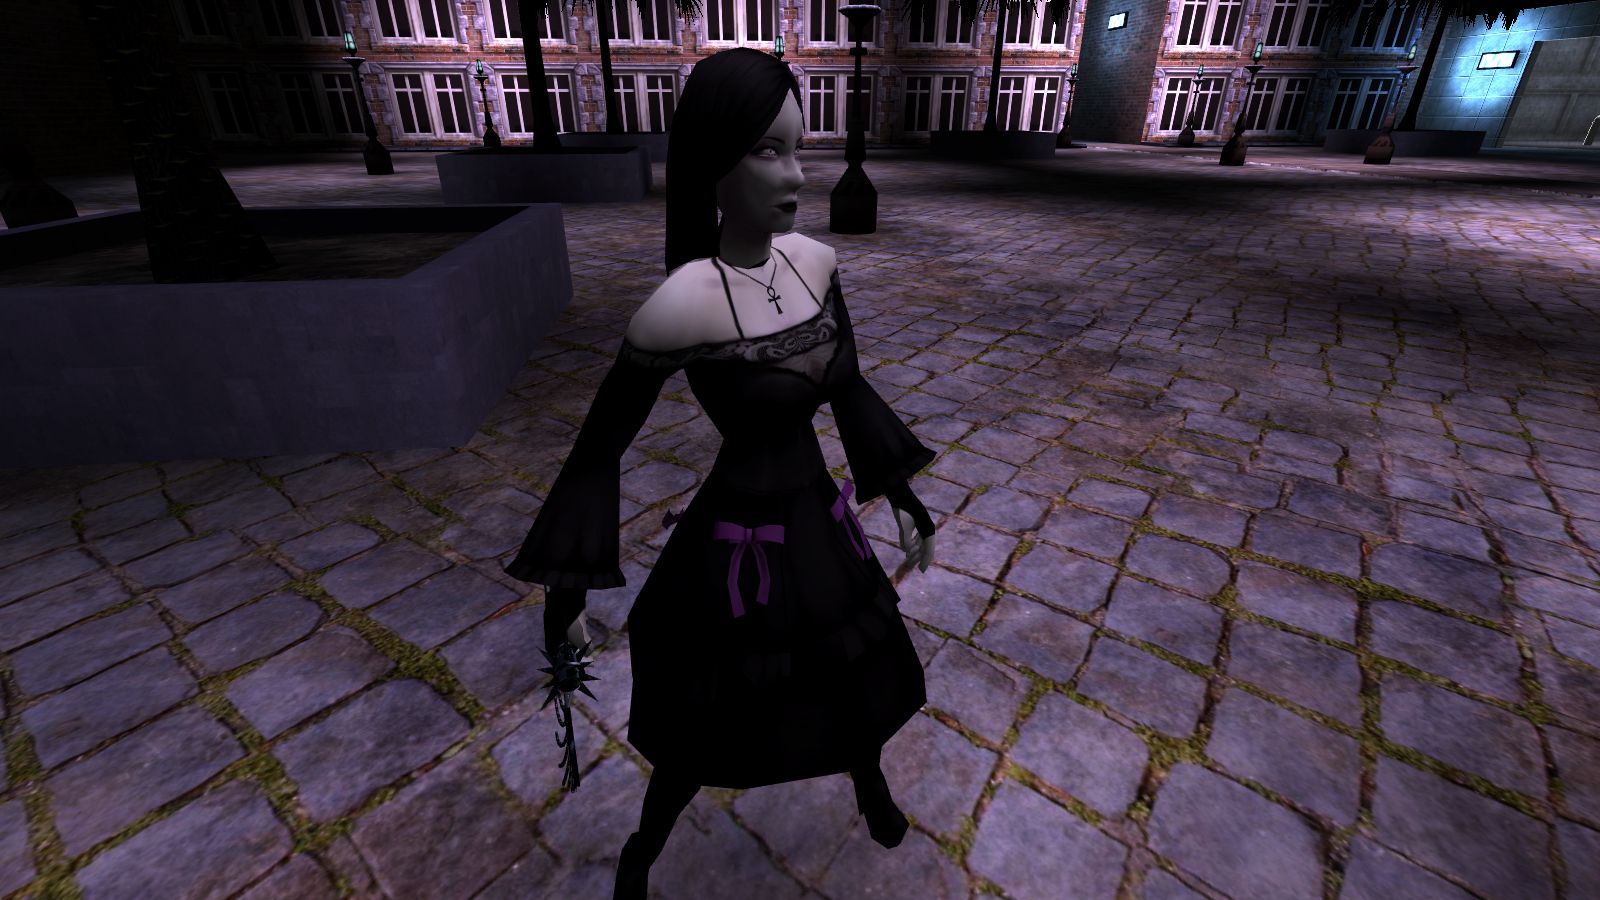 More information about "Gothic Girl"